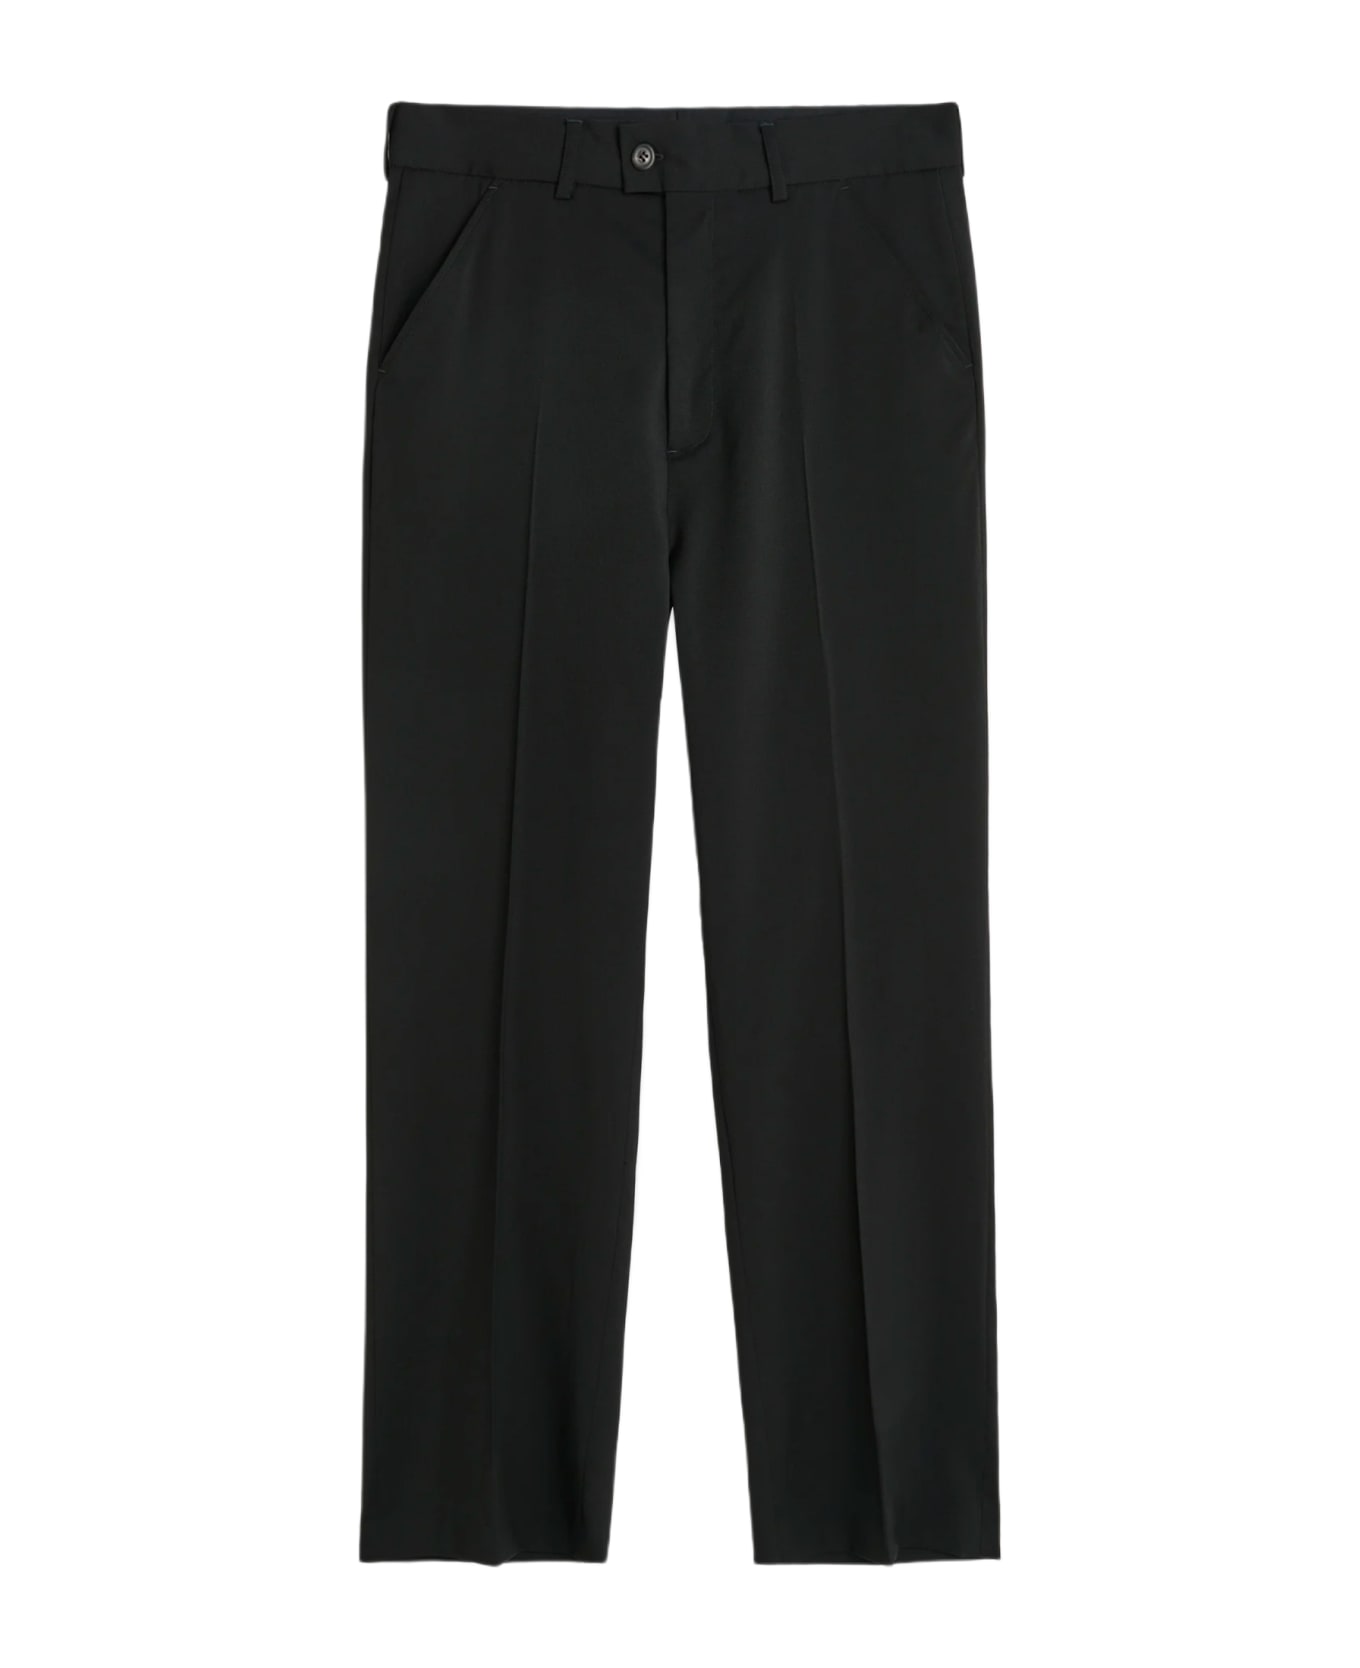 Our Legacy Chino 22 Black wool tailored pant - Chino 22 - Nero